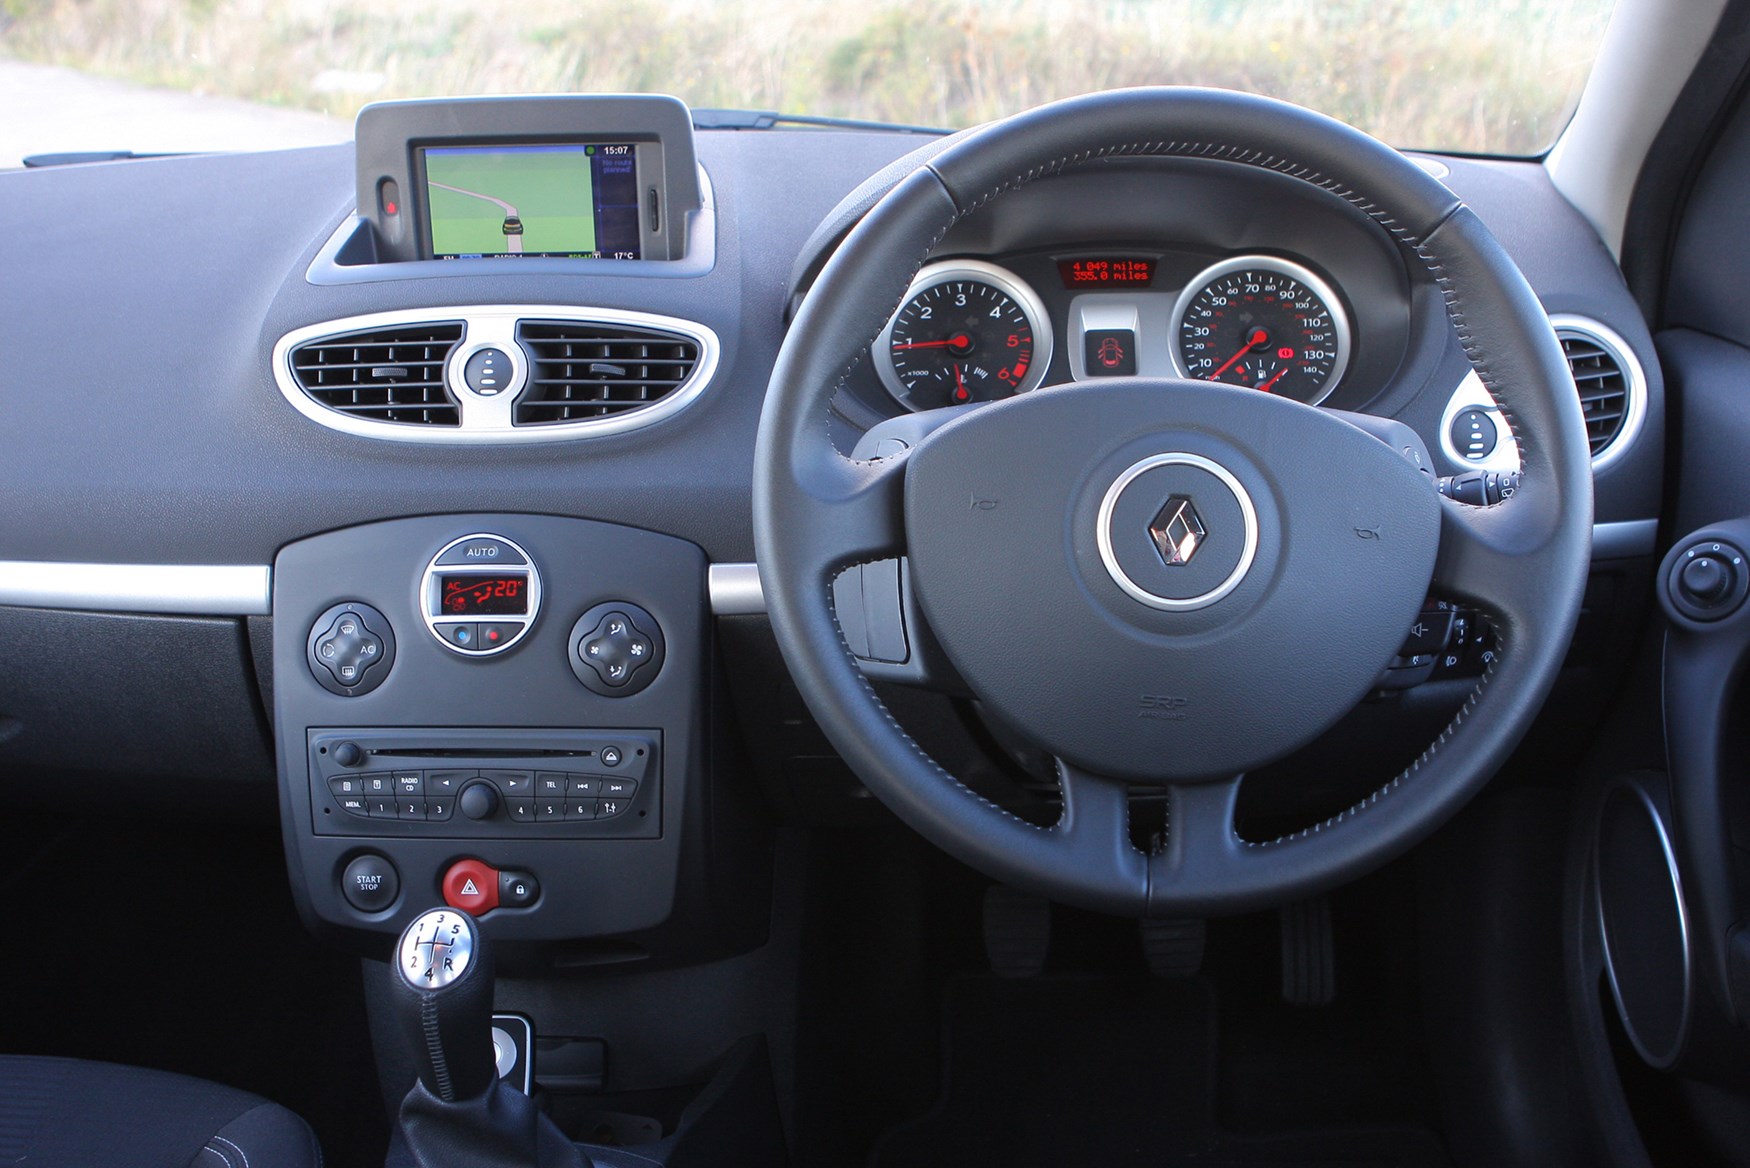 Used Renault Clio Hatchback 2005 2012 Interior Parkers